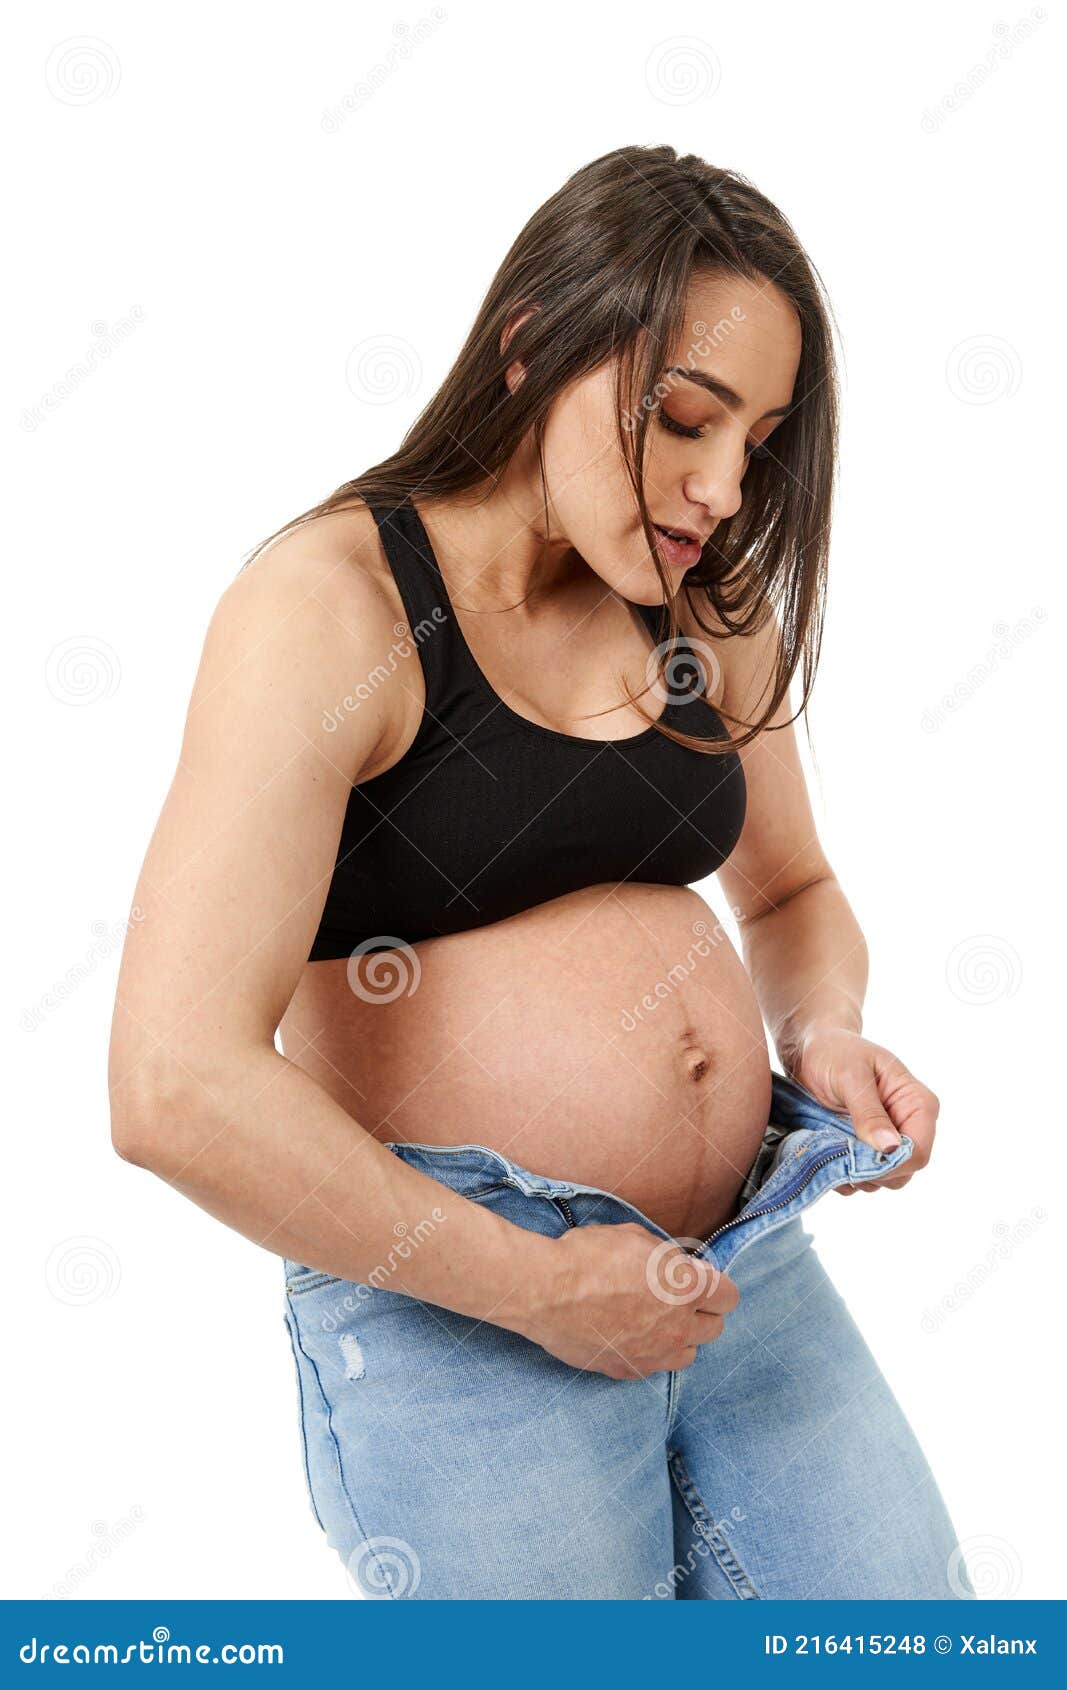 https://thumbs.dreamstime.com/z/pregnant-woman-trying-to-close-zip-her-too-tight-jeans-216415248.jpg